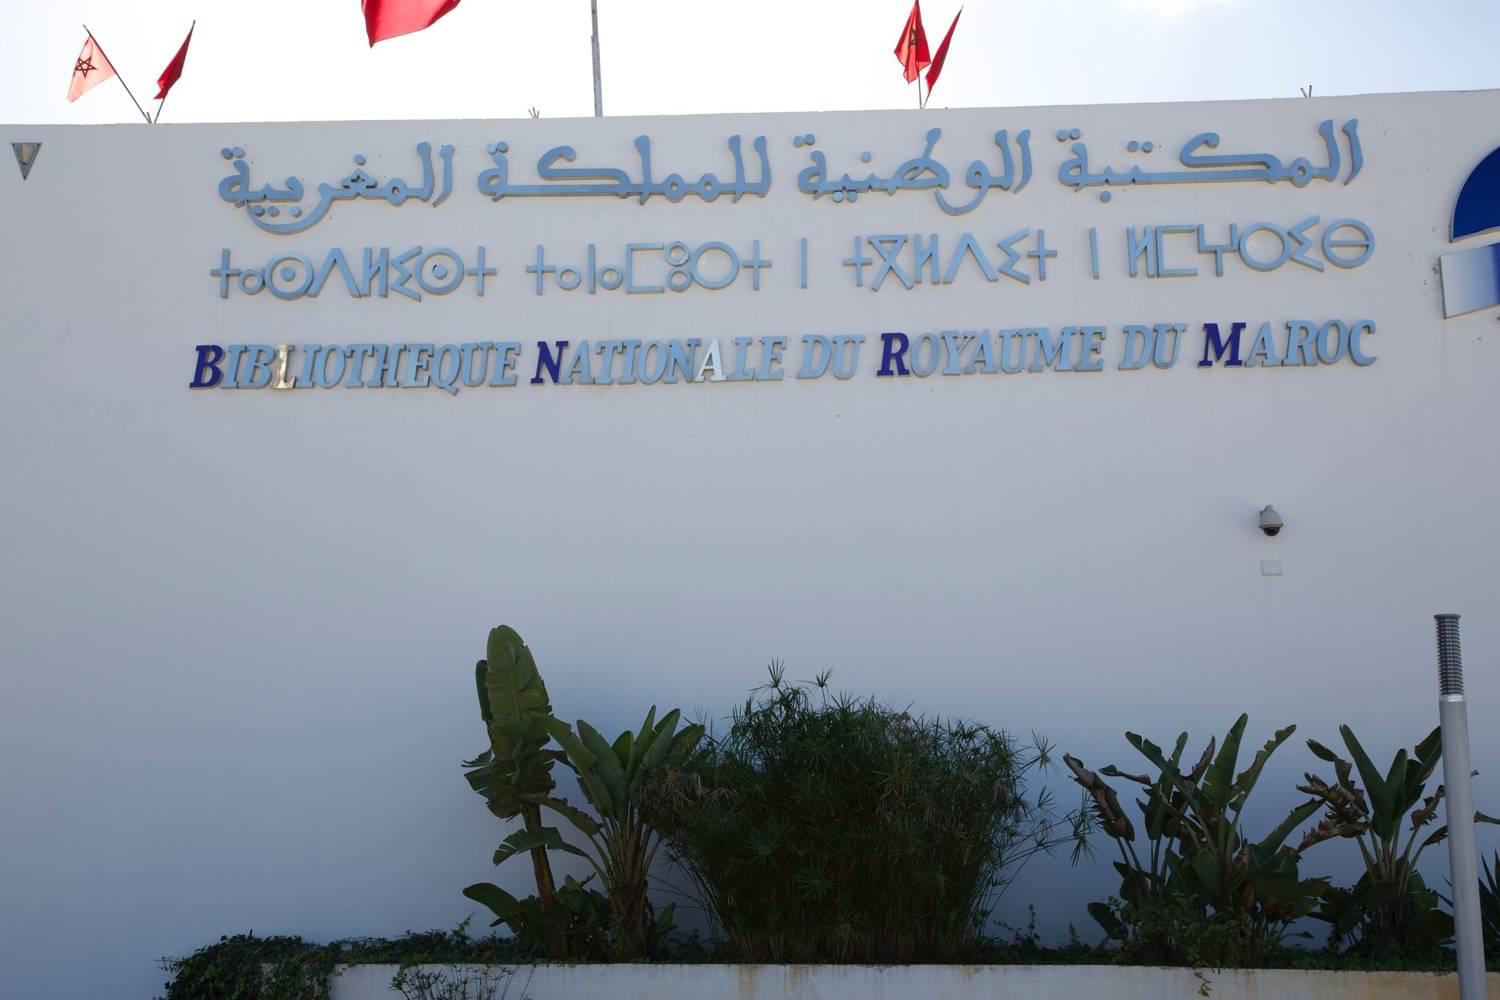 Bibliothèque Nationale du Royaume du Maroc - Sign with the 0fficial name of the library in Morocco's two official languages Arabic (top) and Tamazight (middle), with French at the bottom 